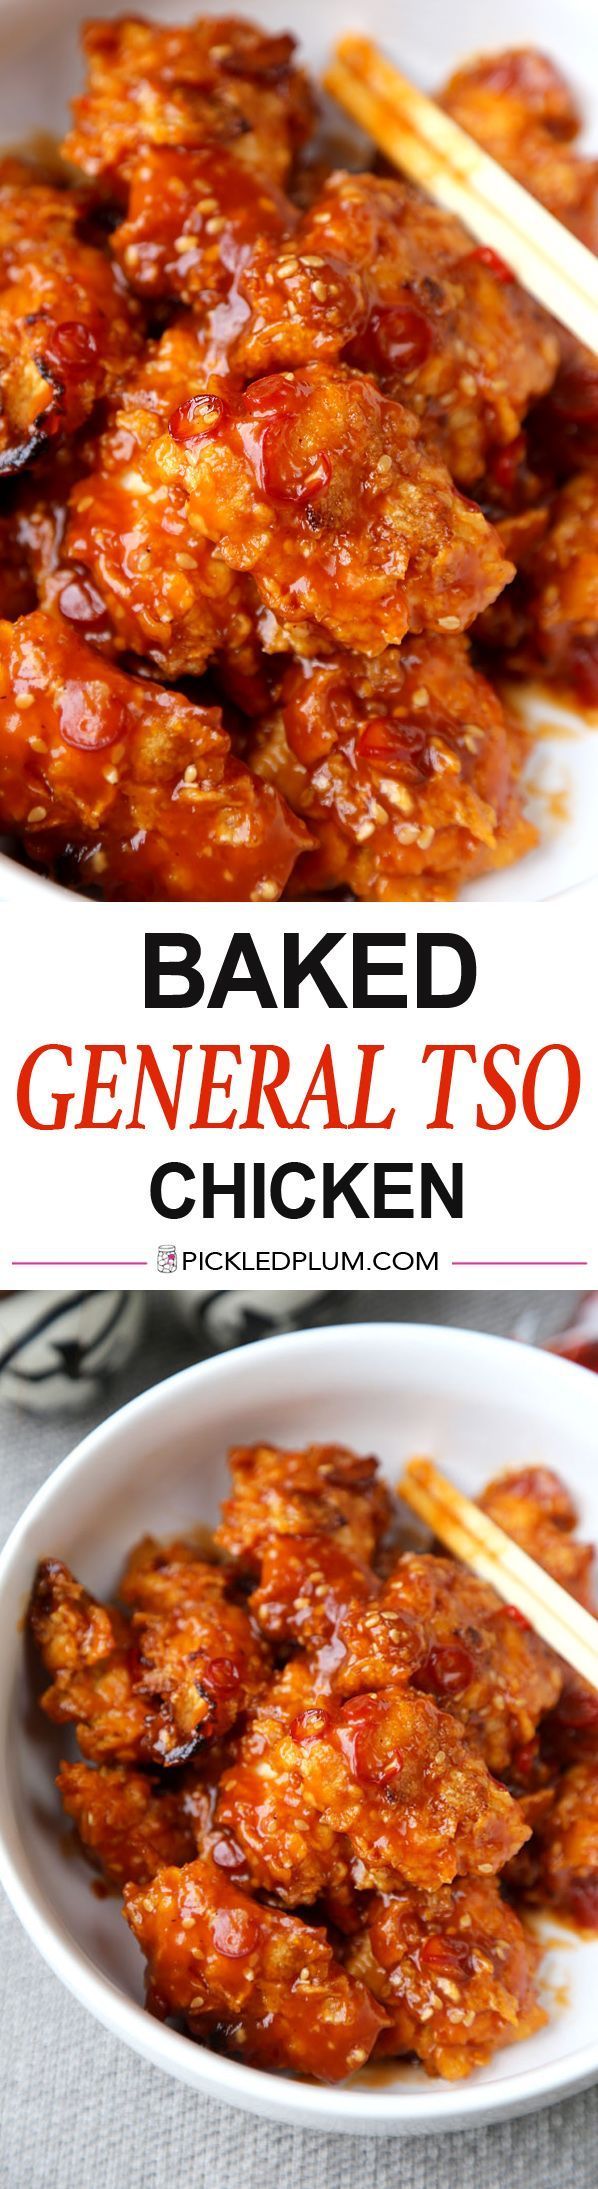 Baked General Tso Chicken Recipe – Crushed Cornflakes imitate fried chicken so well you’ll forget you are